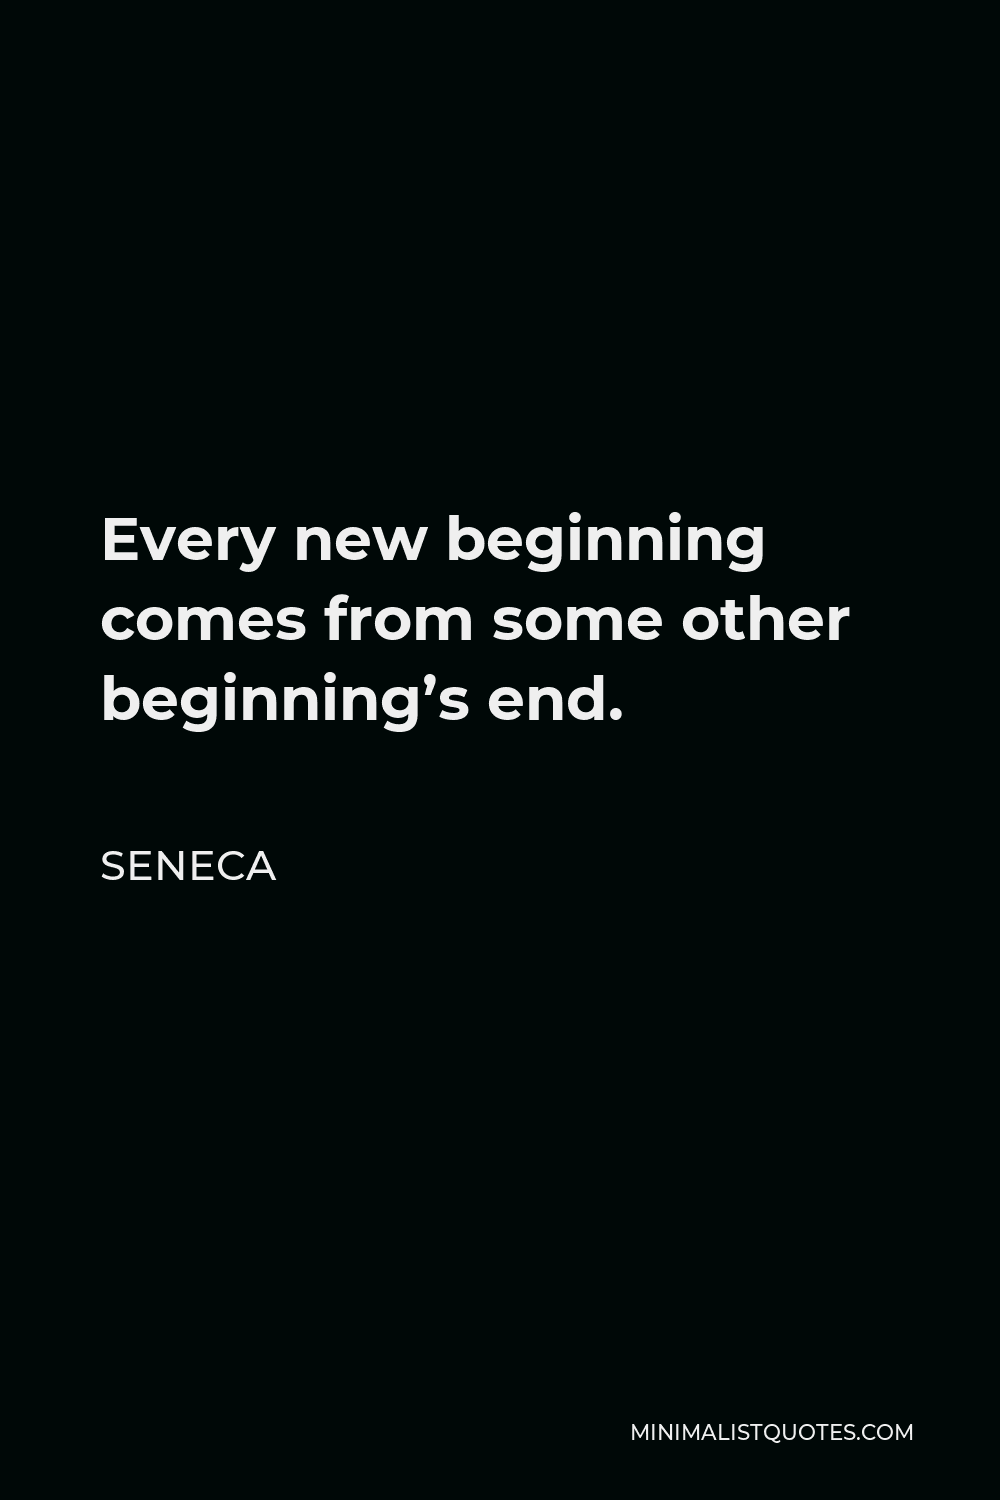 Seneca Quote - Every new beginning comes from some other beginning’s end.